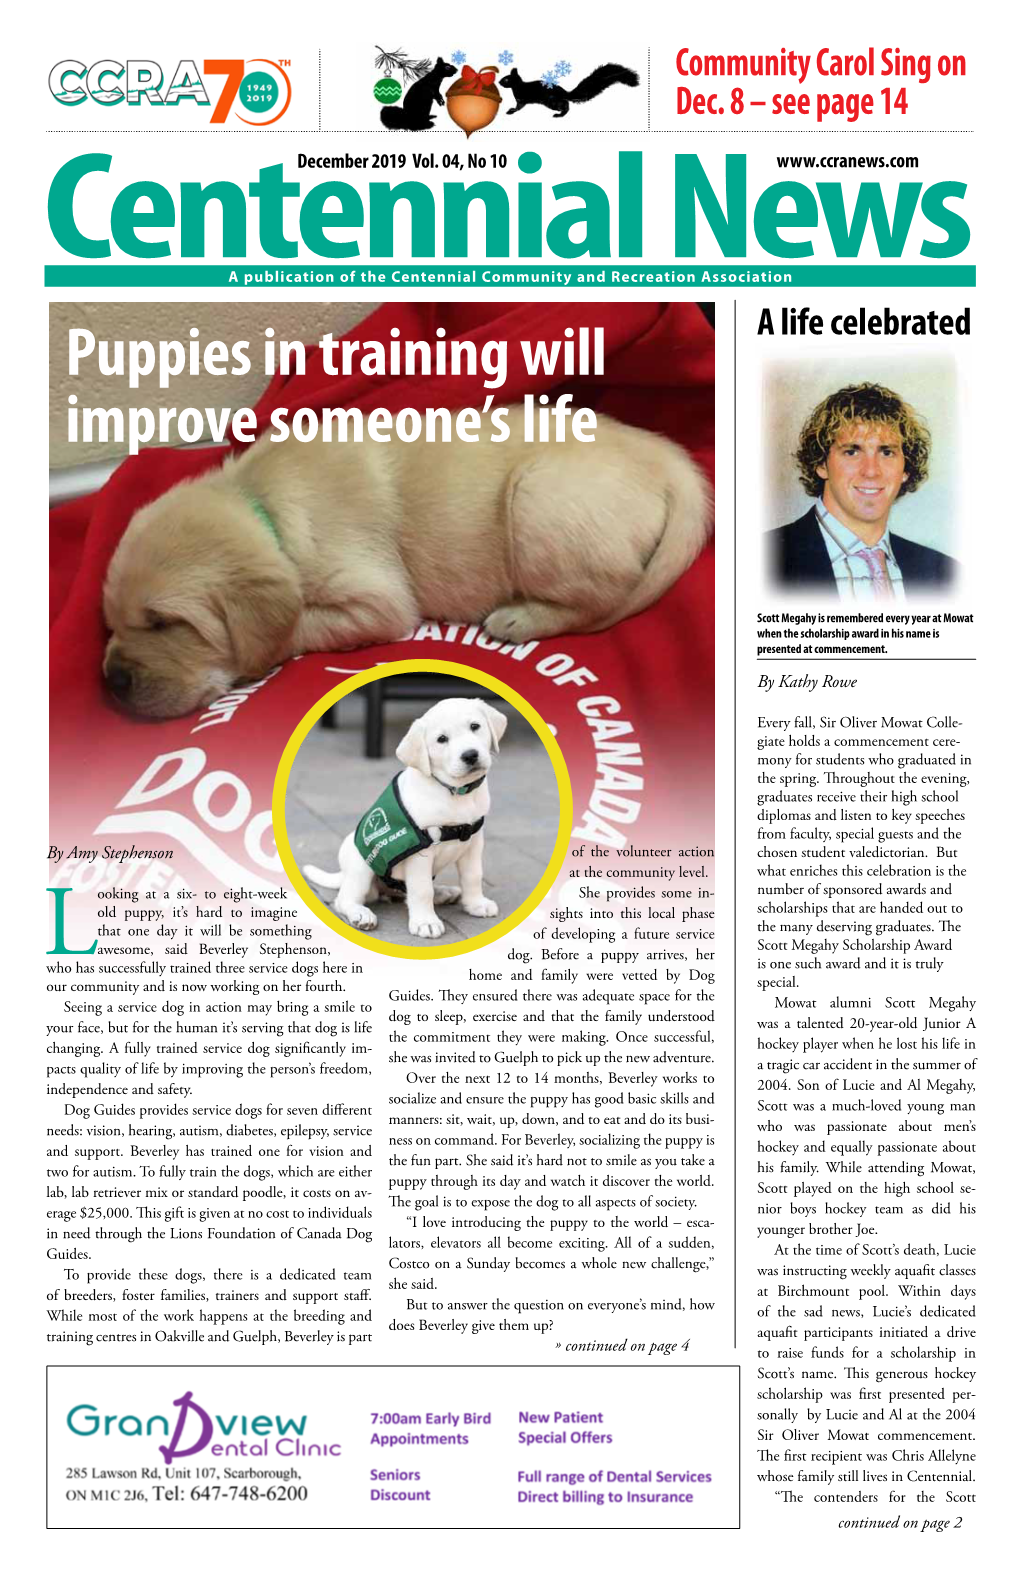 Puppies in Training Will Improve Someone's Life